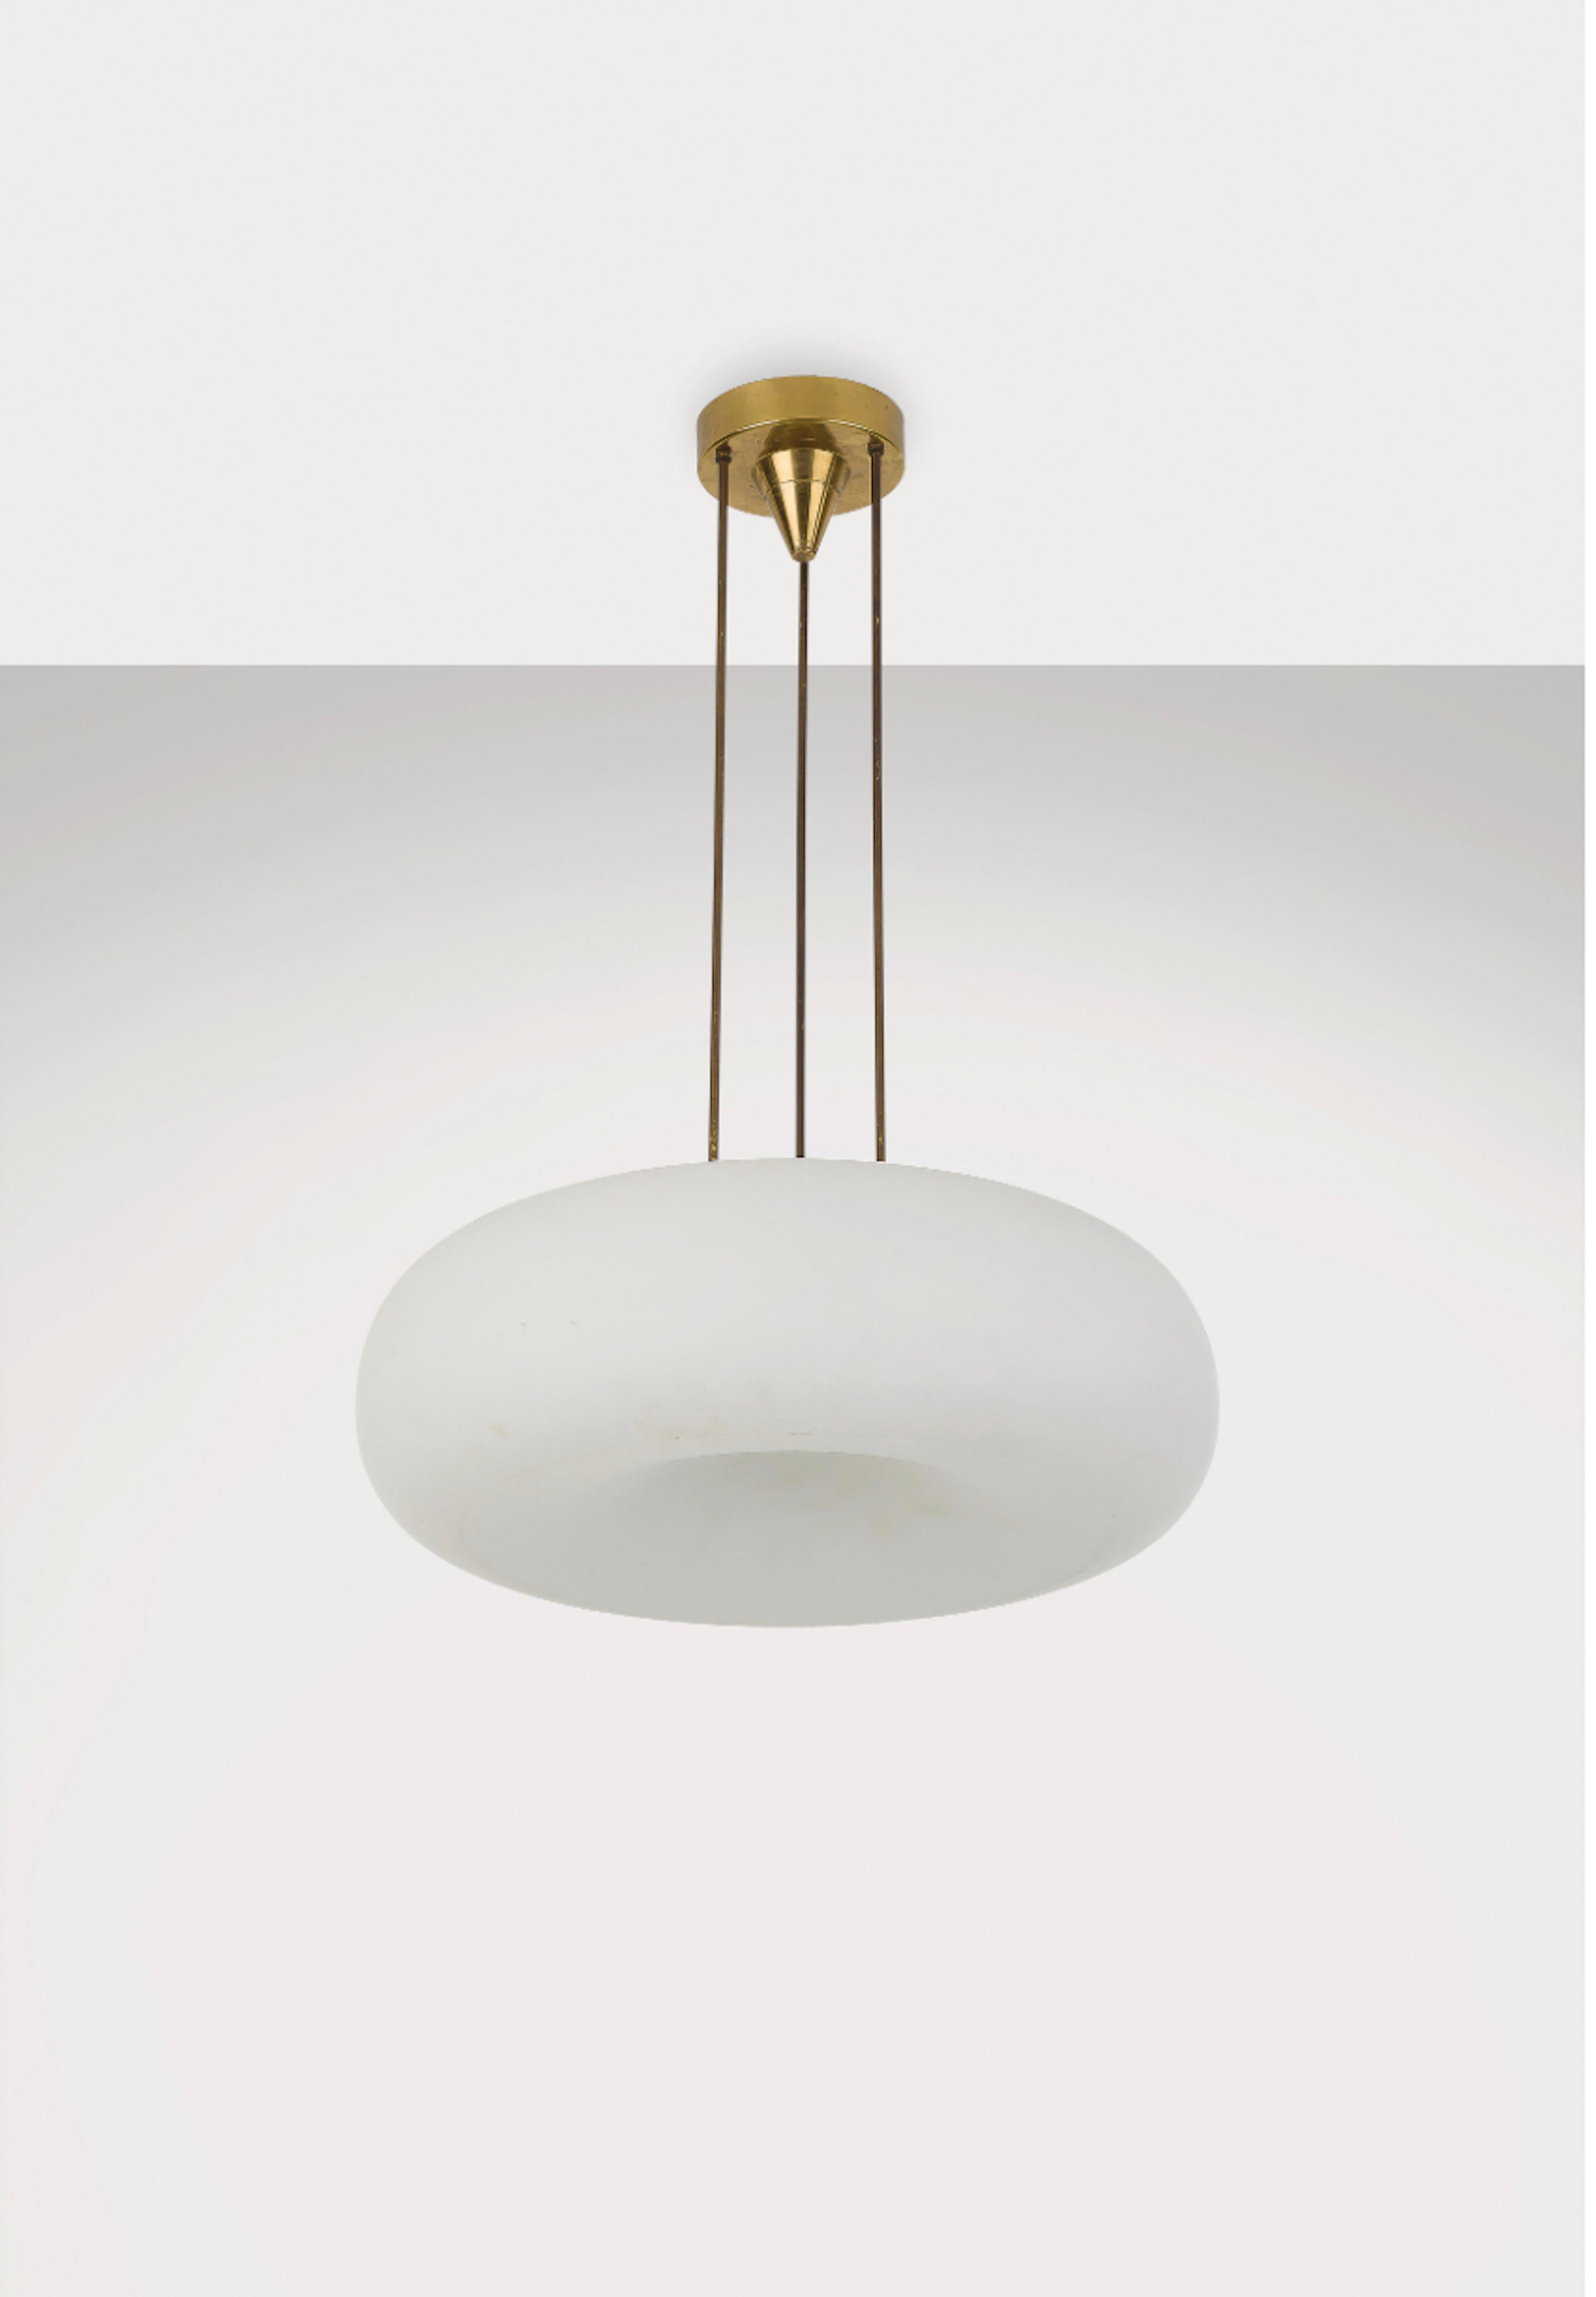 Max Ingrand 2356 ceiling light Fontana Arte Italy 1967

This rare and extraordinary Fontana Arte suspension chandelier is an icon of mid-century Italian design, made of solid brass and opaline glass, it gives importance and refinement to the